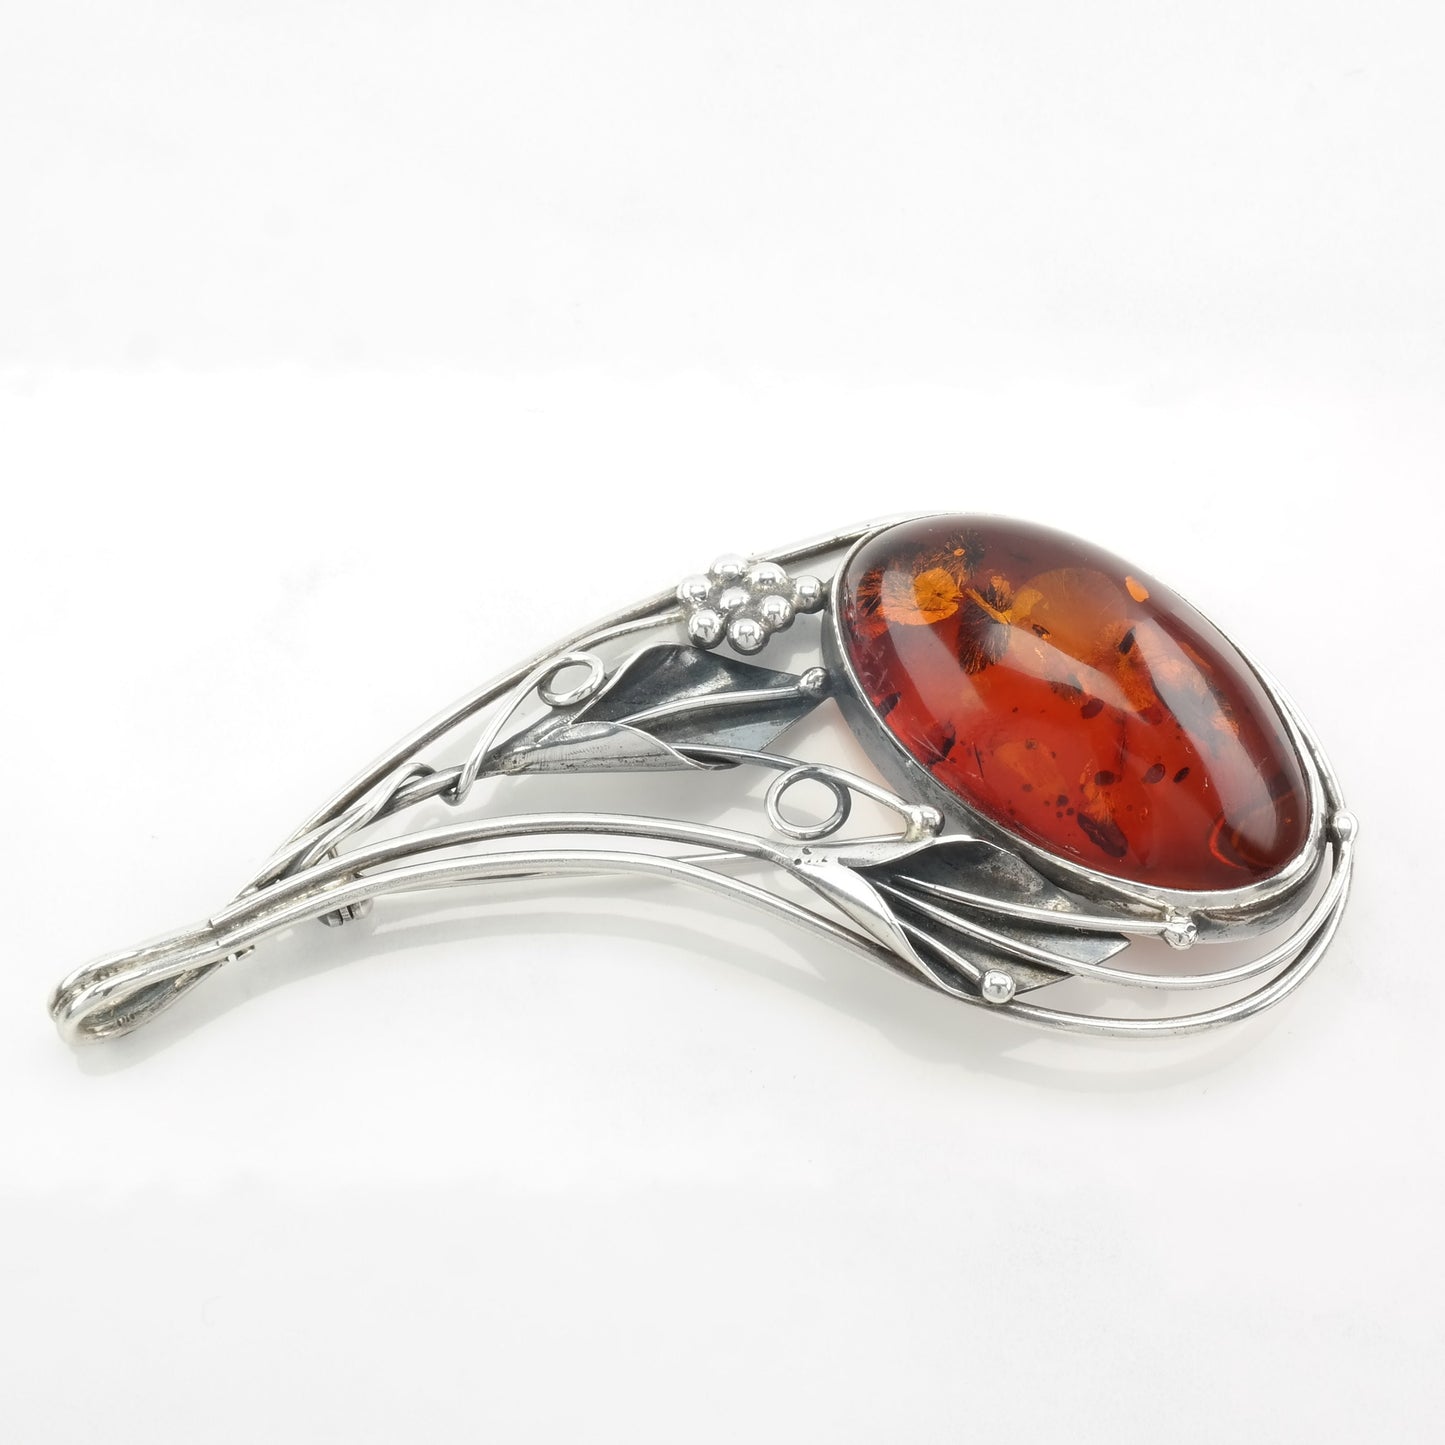 Silver Brooch Pendant Floral Baltic Amber Sterling